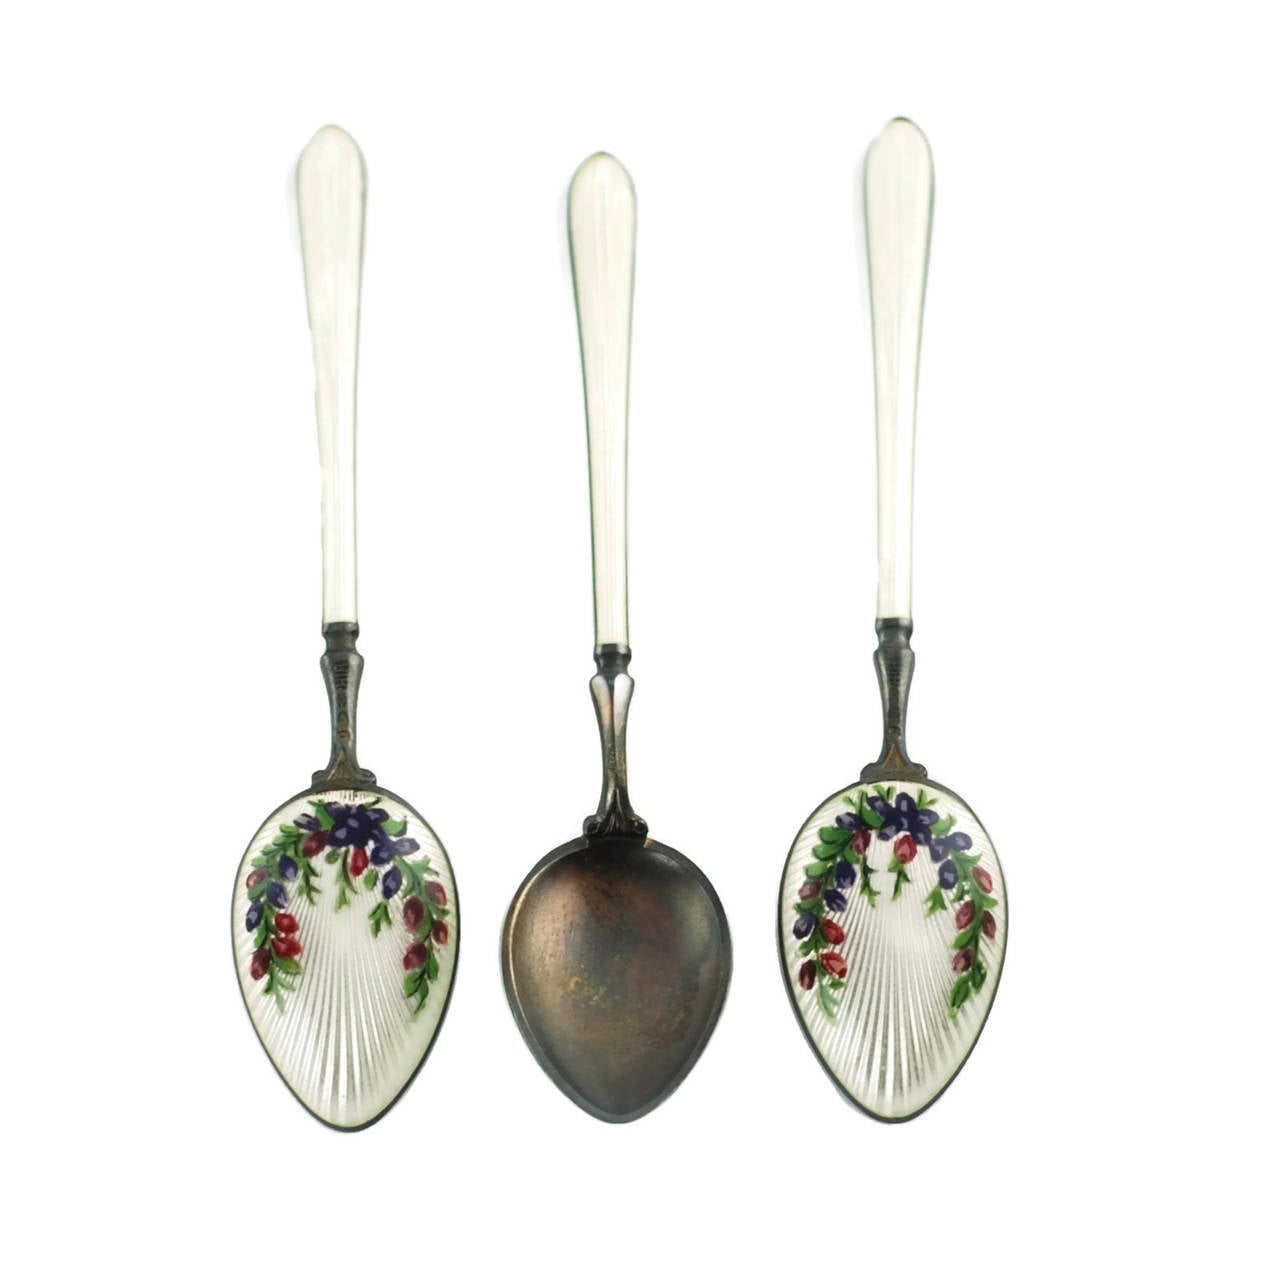 Painted Royal Worcester James Stinton Cased Coffee Set with Enameled Sterling Spoons